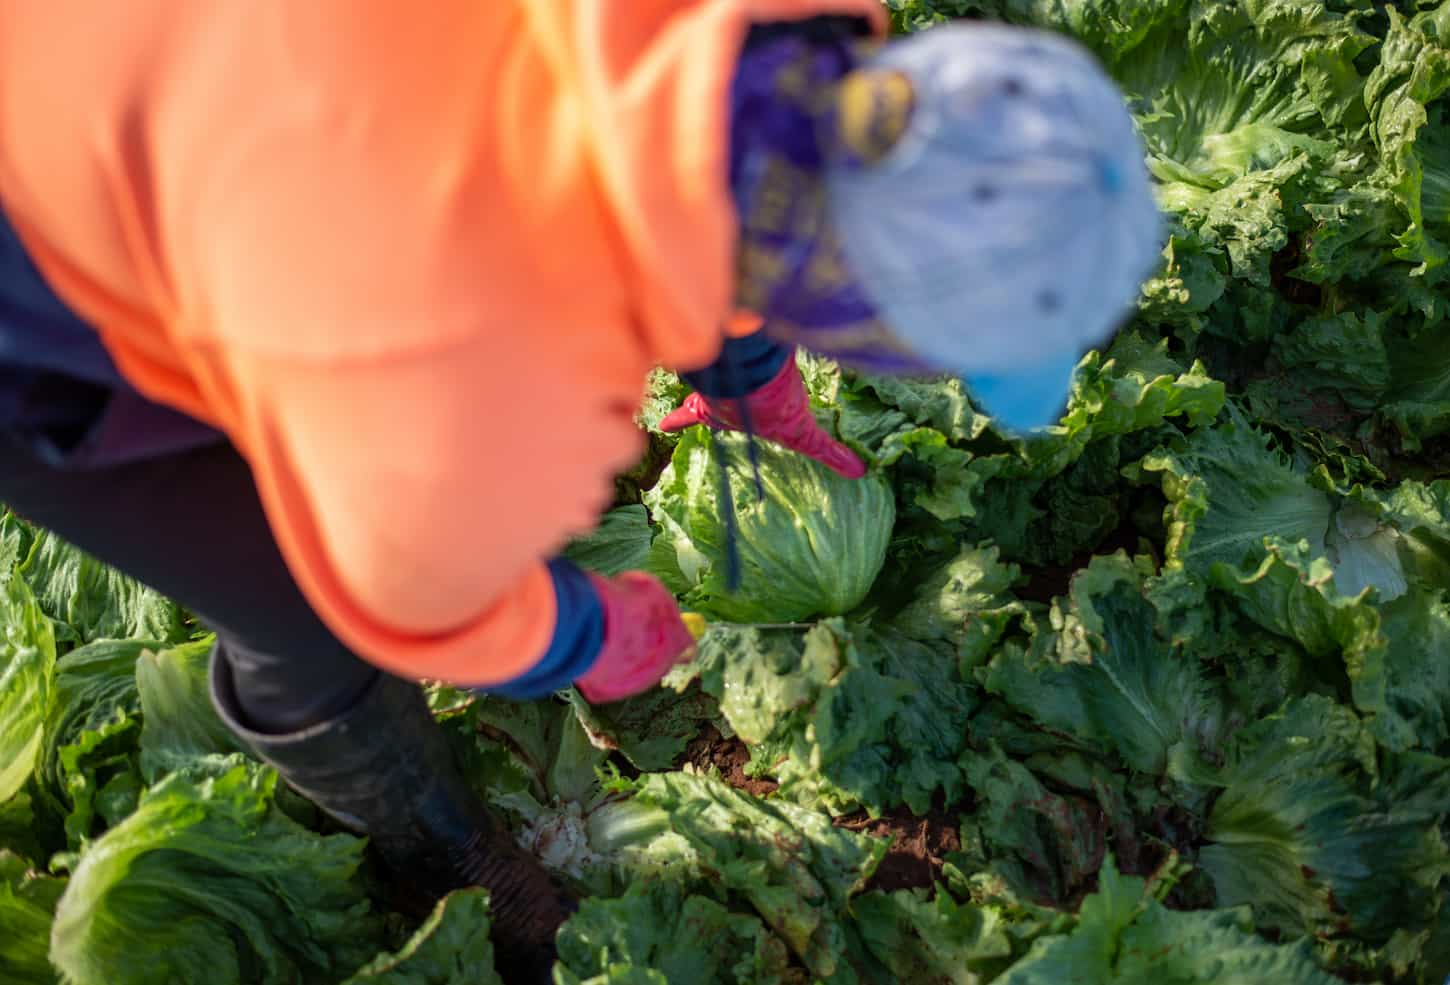 A top-view image of a farm woman worker harvesting lettuce on a farm.